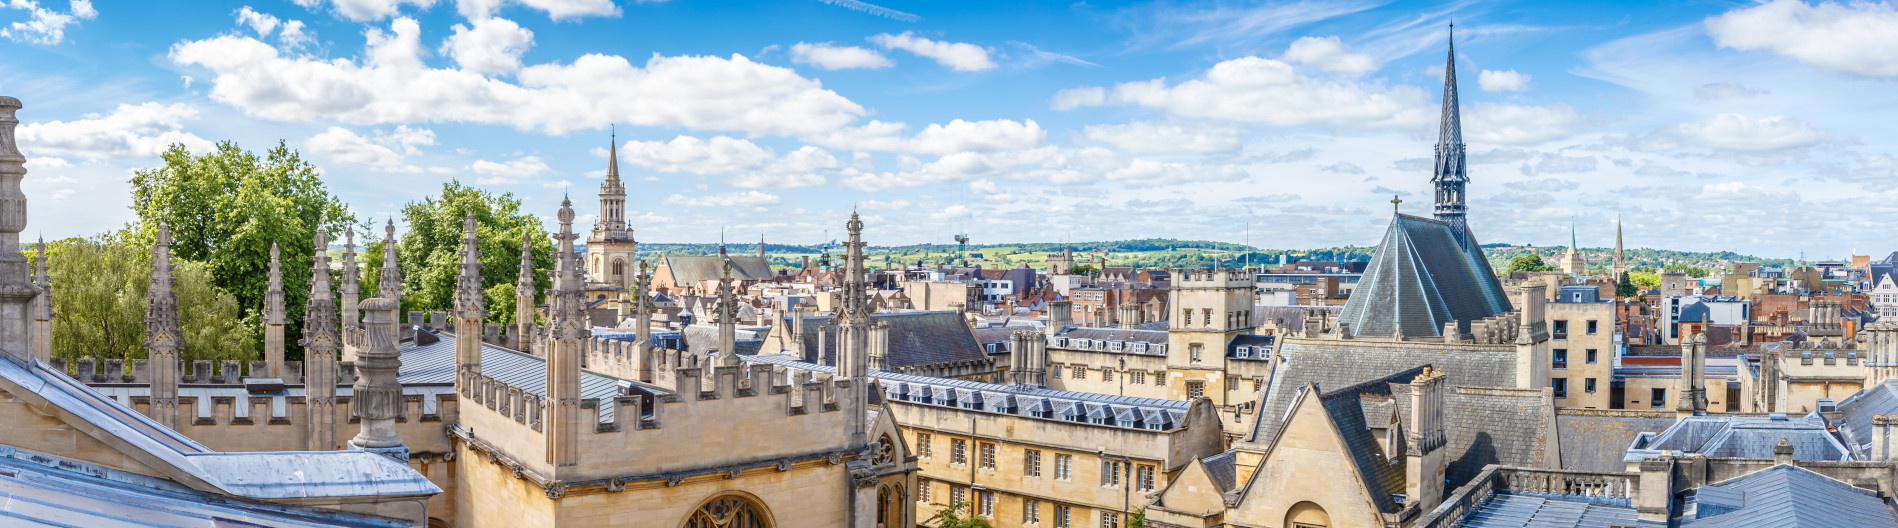 Image: Panormaic view of Oxford